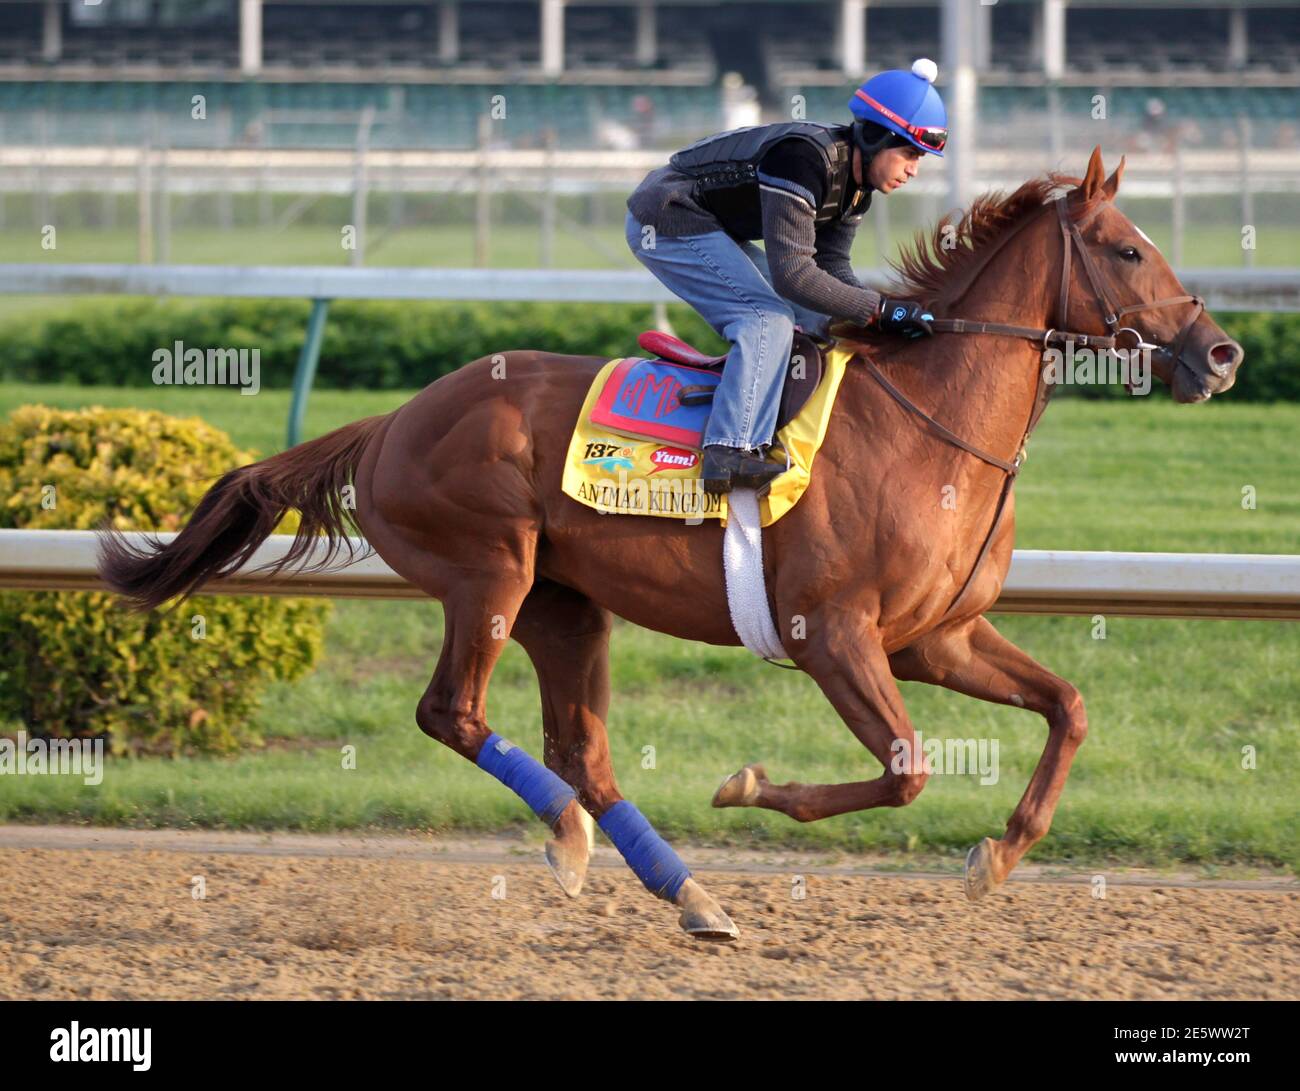 Exercise rider James Slater takes Kentucky Derby hopeful Animal Kingdom for  a workout at Churchill Downs in Louisville, Kentucky, May 4, 2011.  REUTERS/John Sommers II (UNITED STATES - Tags: SPORT HORSE RACING